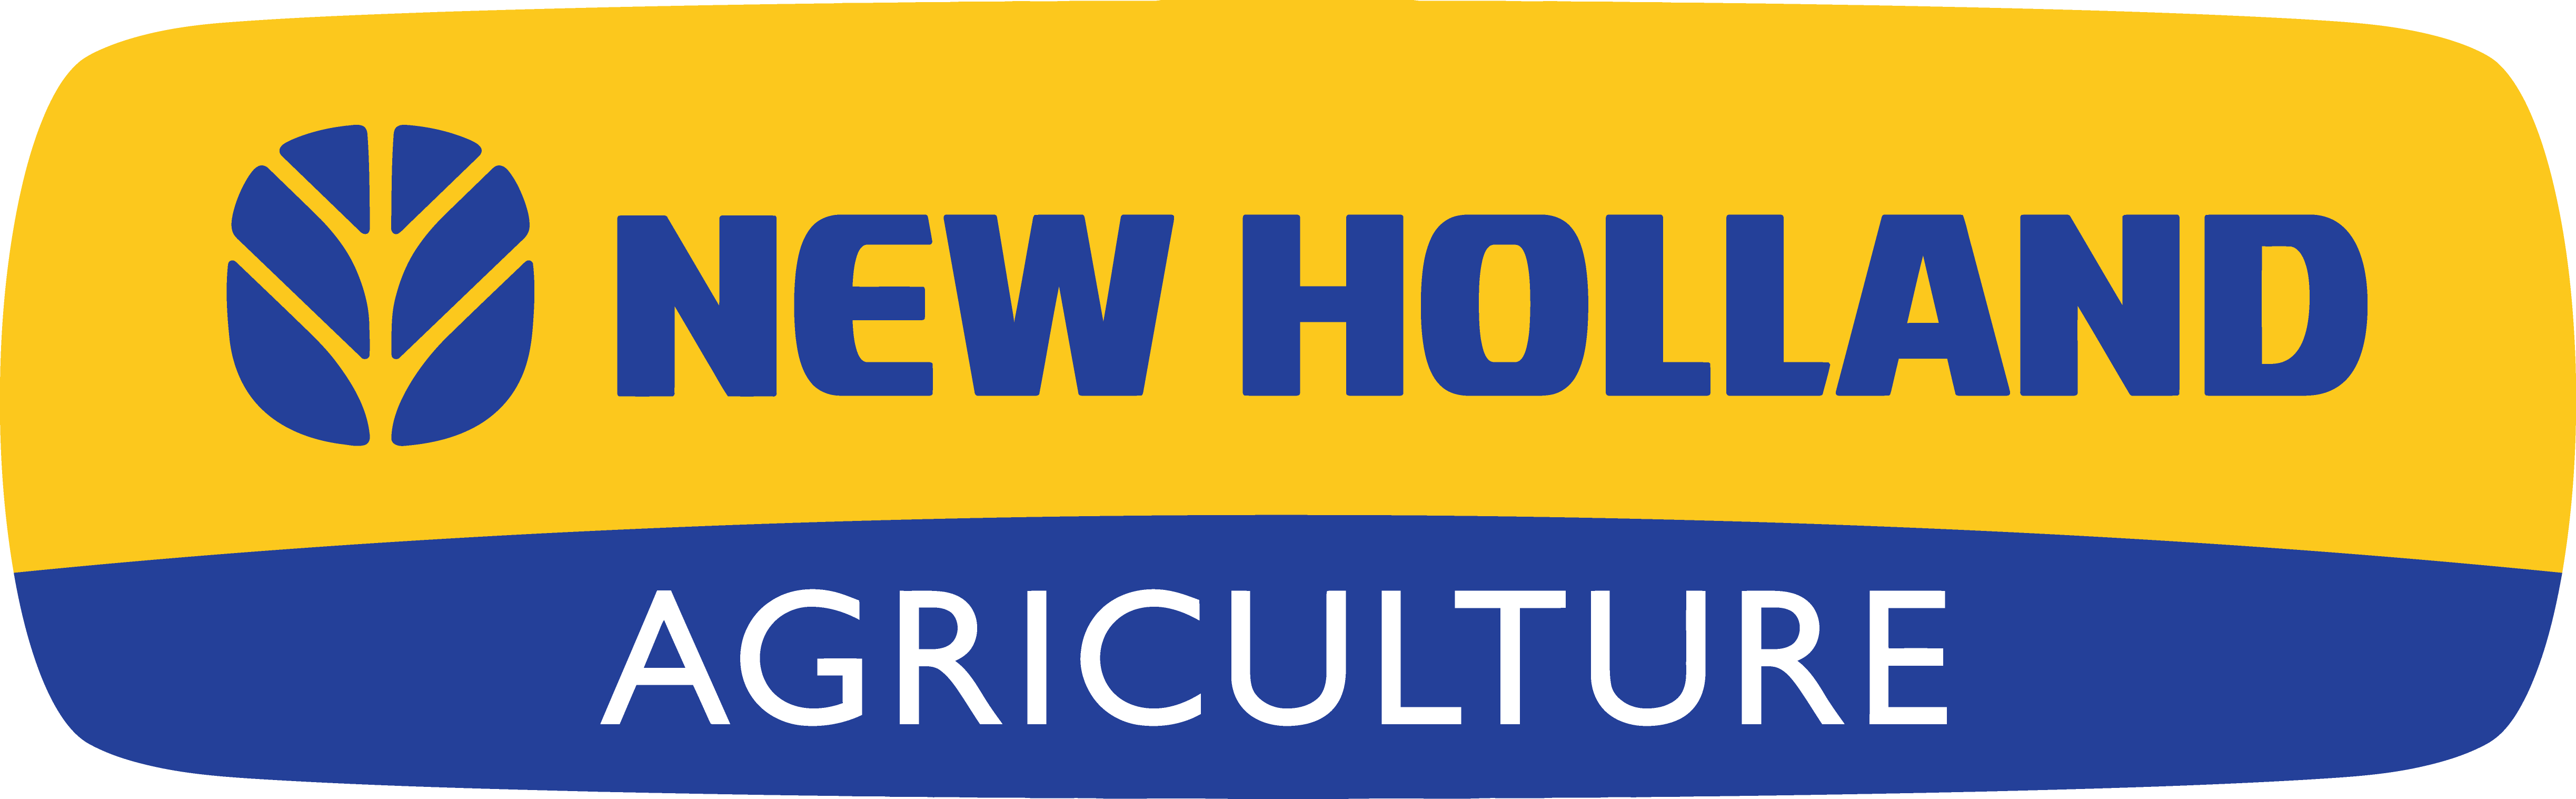 Ford New Holland Logo - New Holland Agriculture